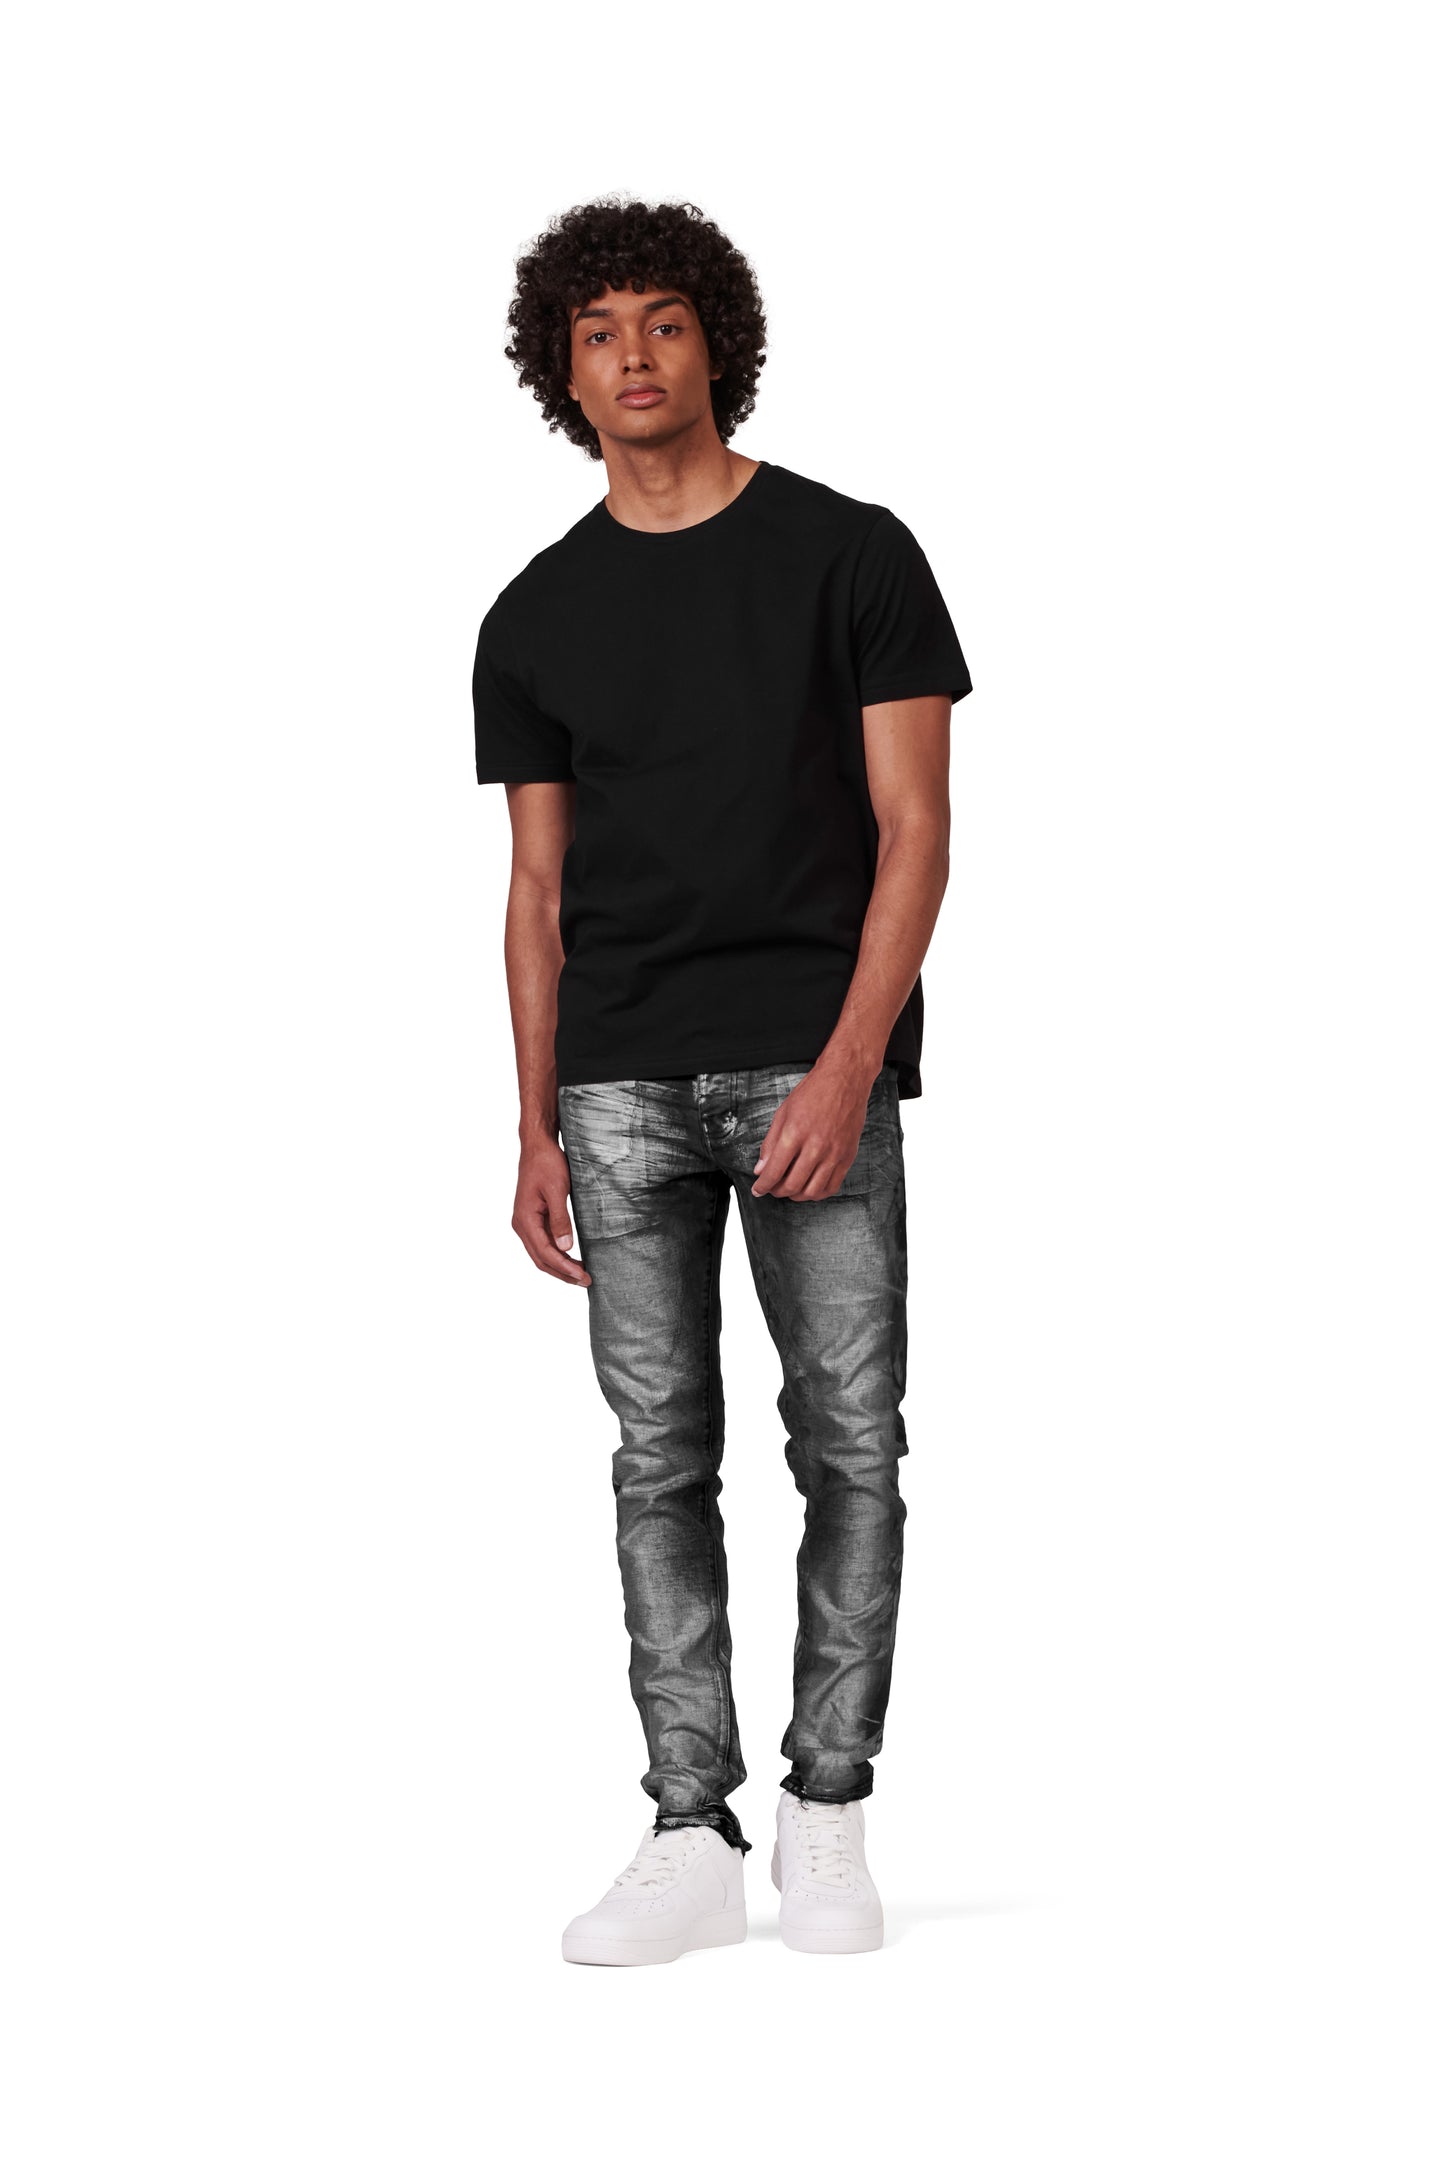 P001 LOW RISE SKINNY JEAN - Washed Black Iridescent Pearl